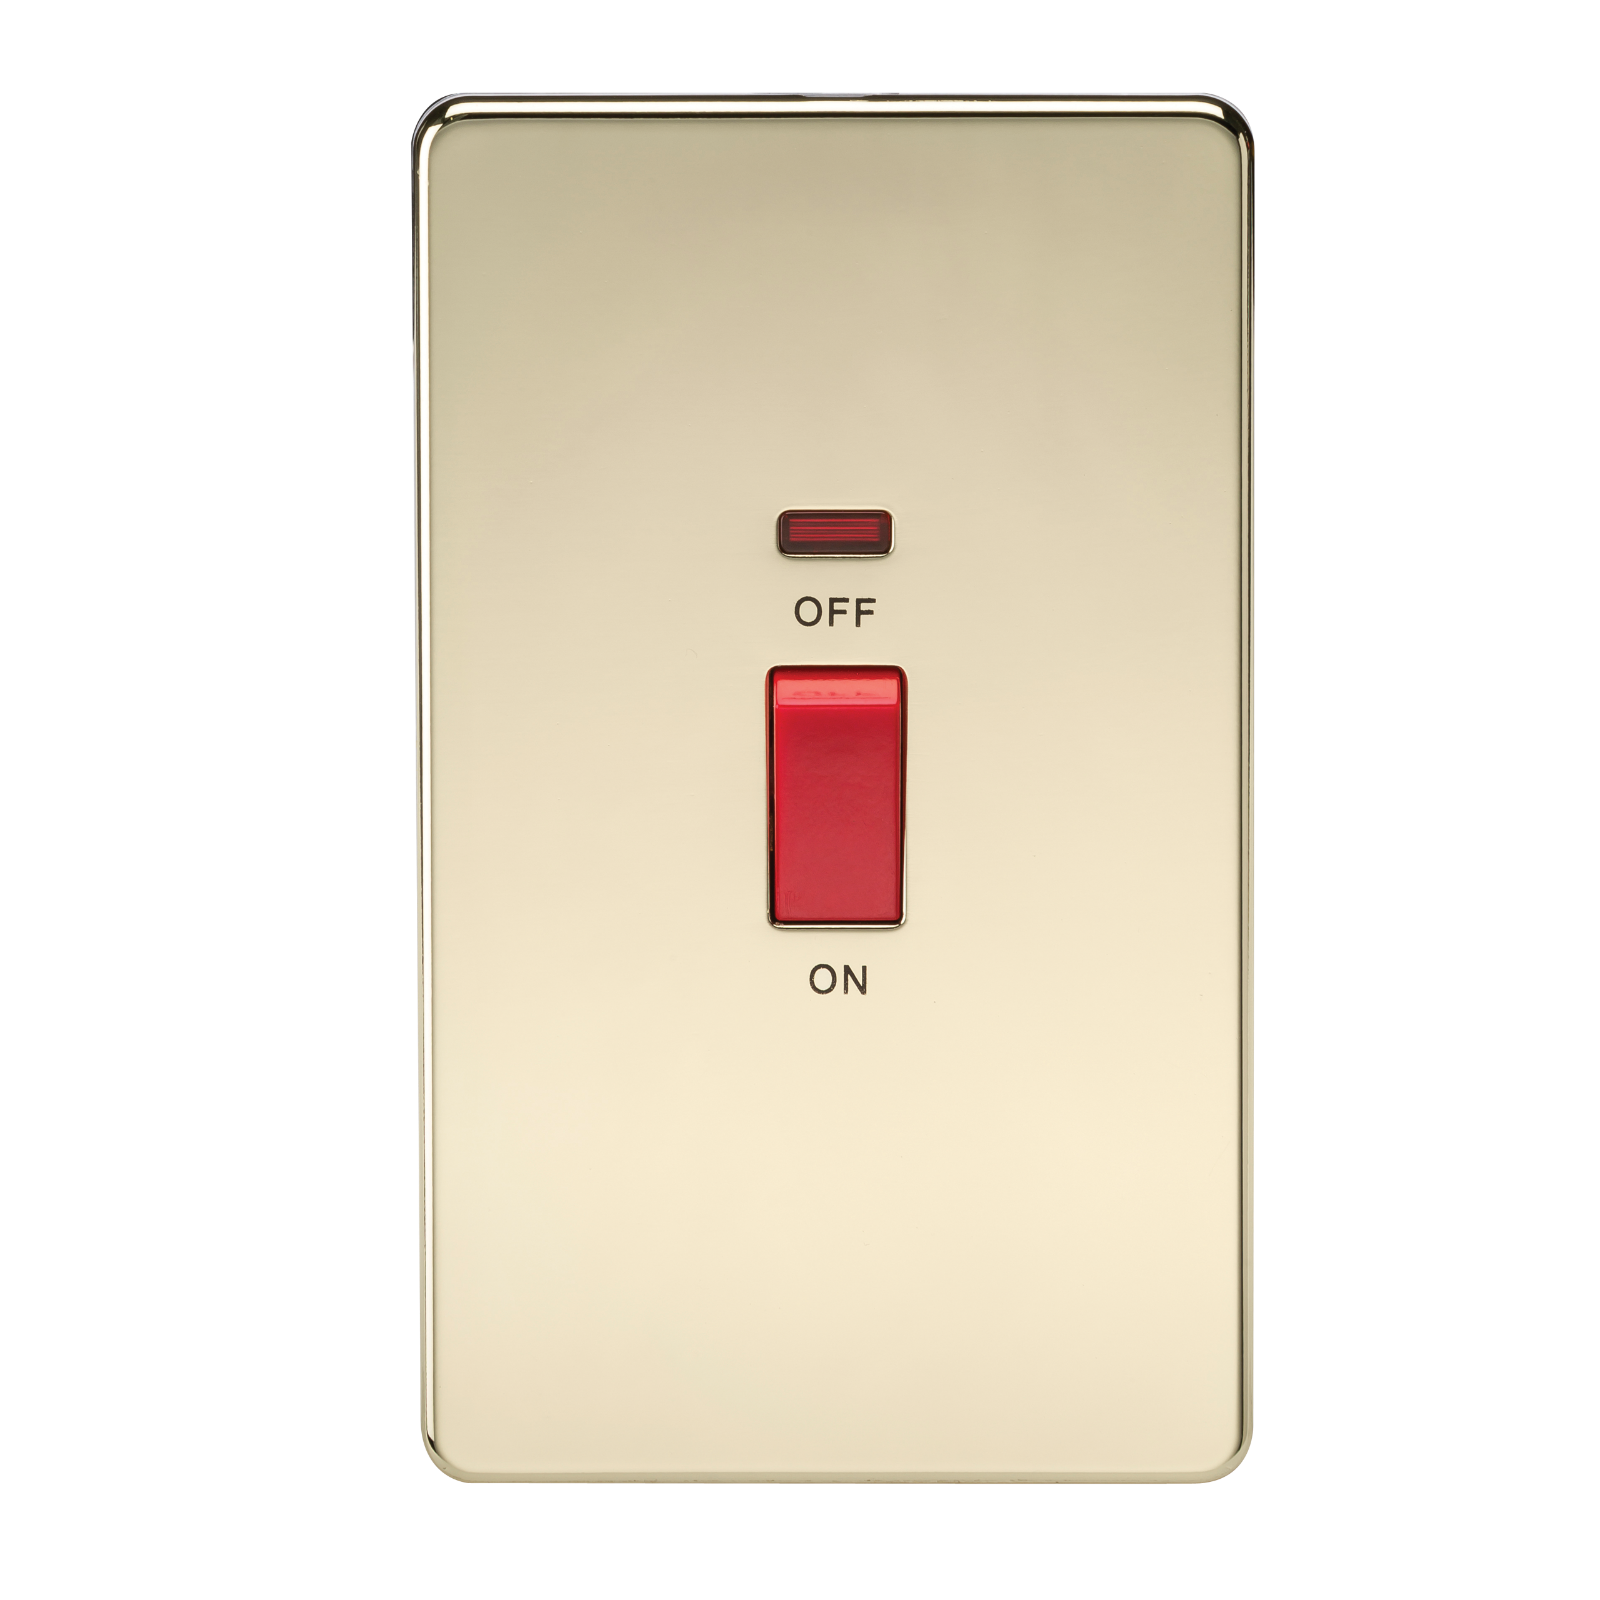 Screwless 45A 2G DP Switch With Neon - Polished Brass - SF8332NPB 